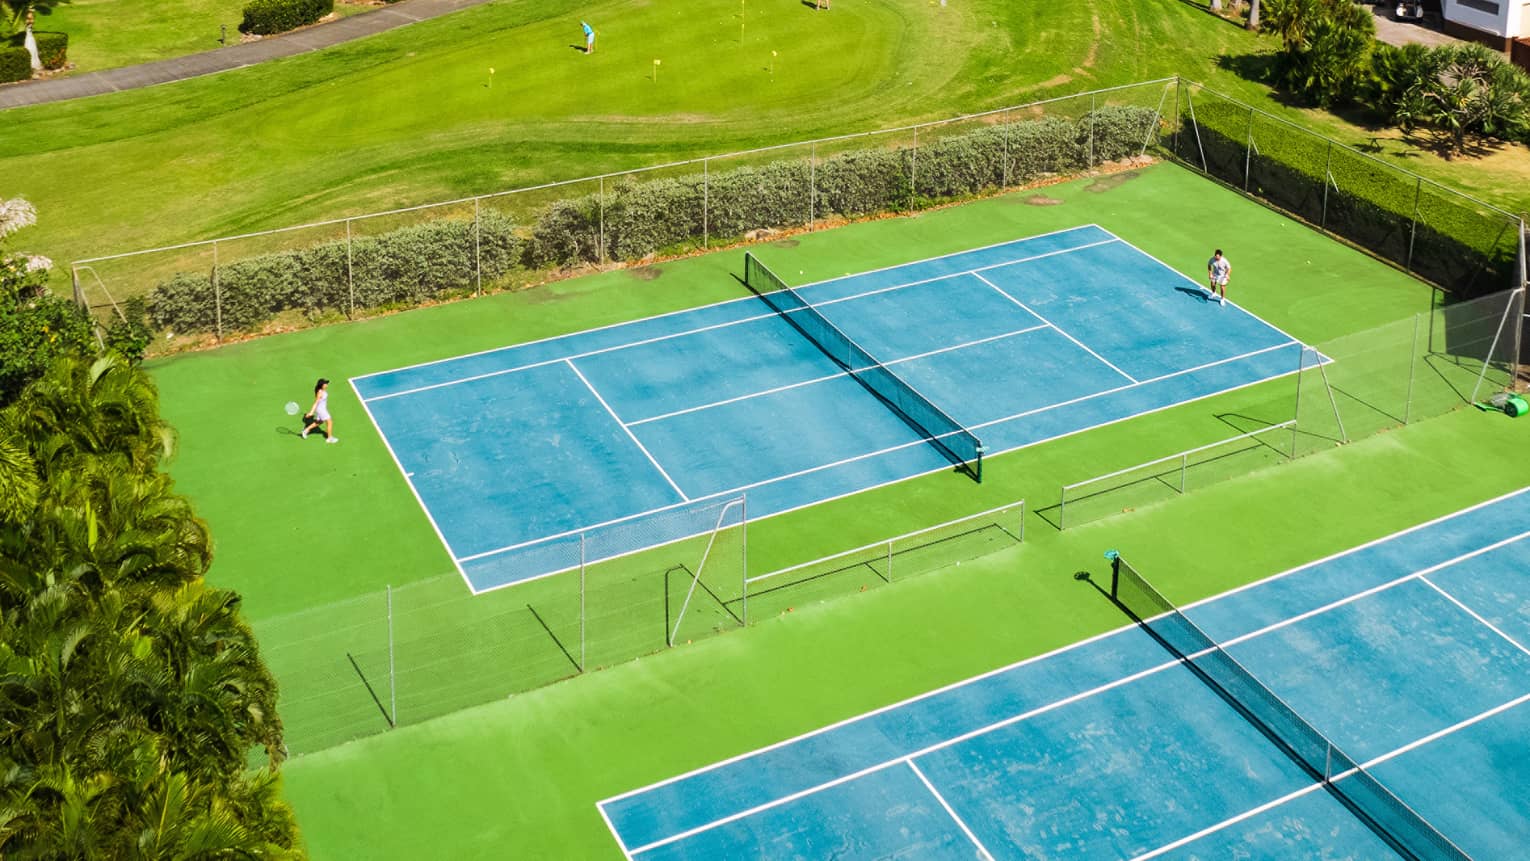 Two tennis or pickleball courts with a mountain in the background on a bright day.